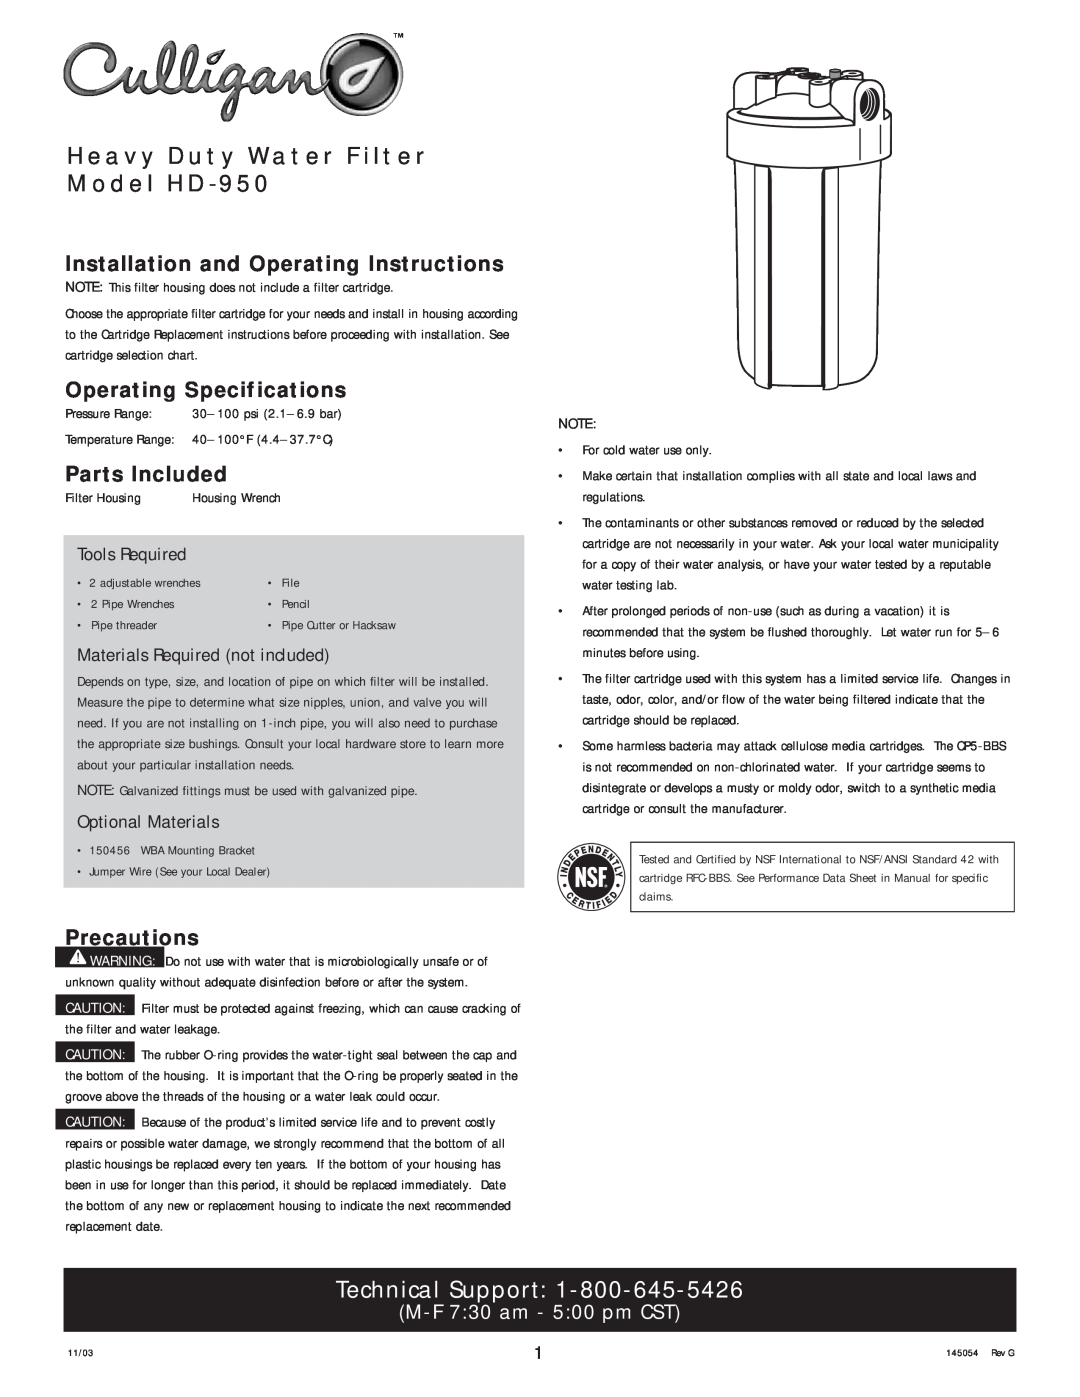 Kenmore manual Heavy Duty Water Filter Model HD-950, Installation and Operating Instructions, Operating Specifications 